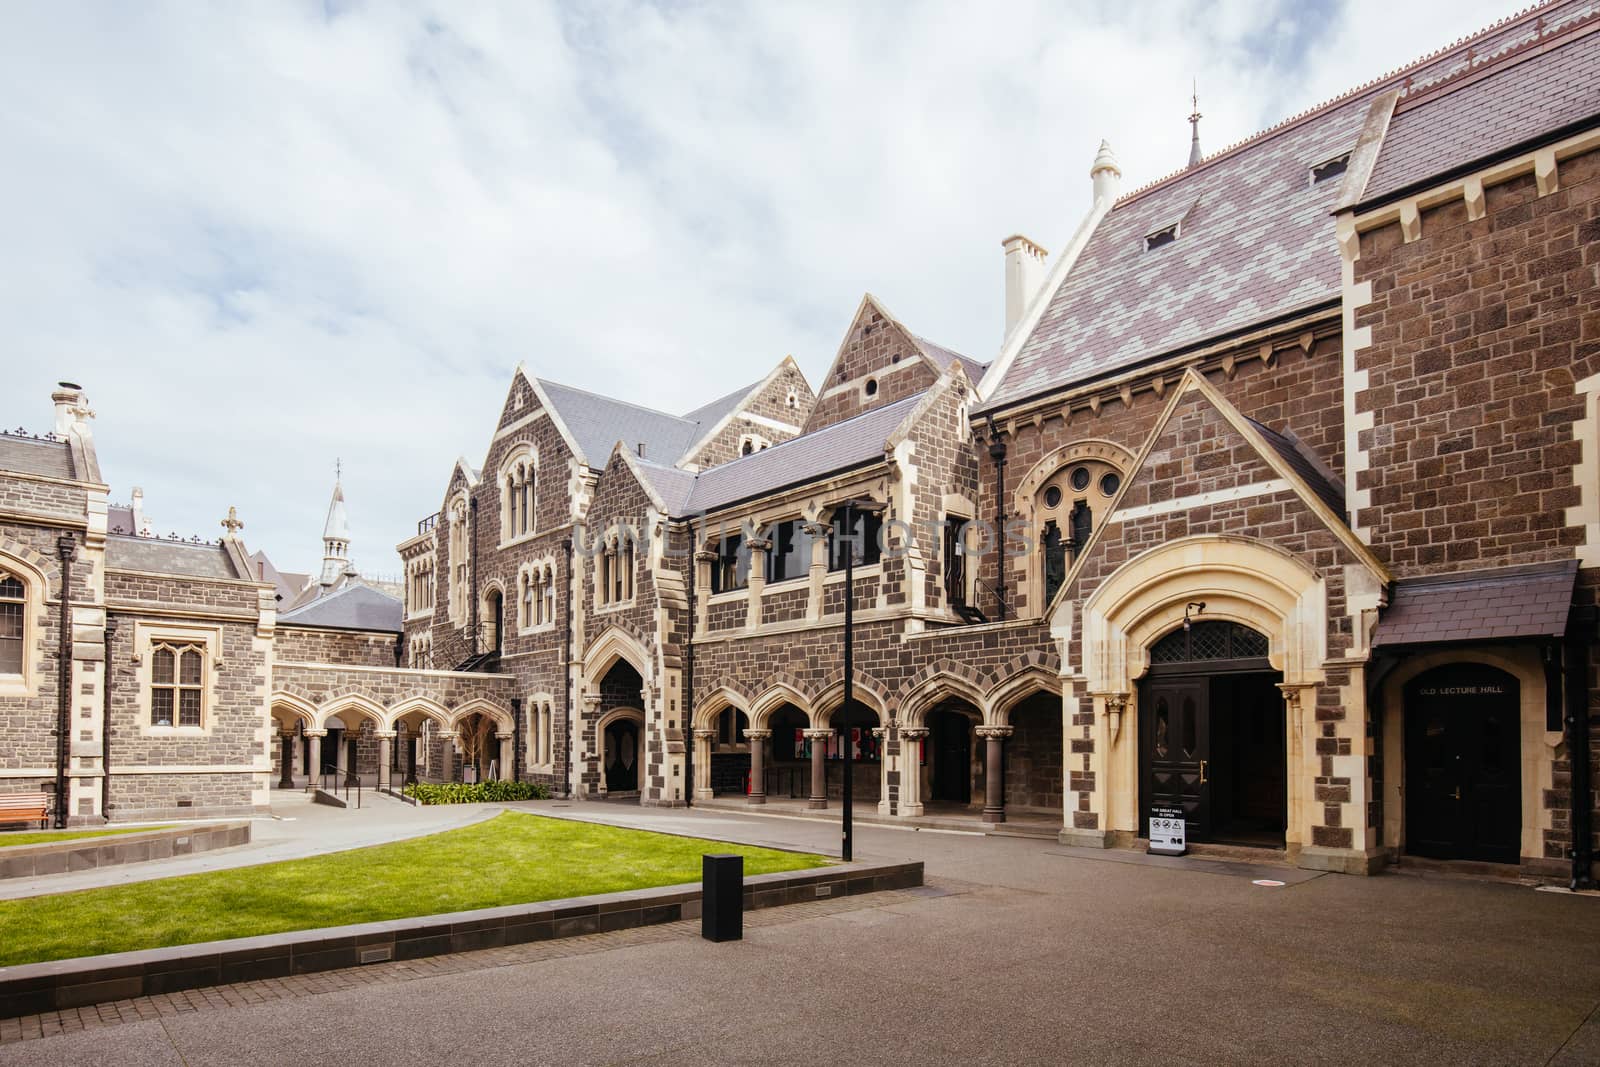 Christchurch, New Zealand - September 16 2019: The iconic and historic Great Hall at The Arts Centre in Christchurch, New Zealand